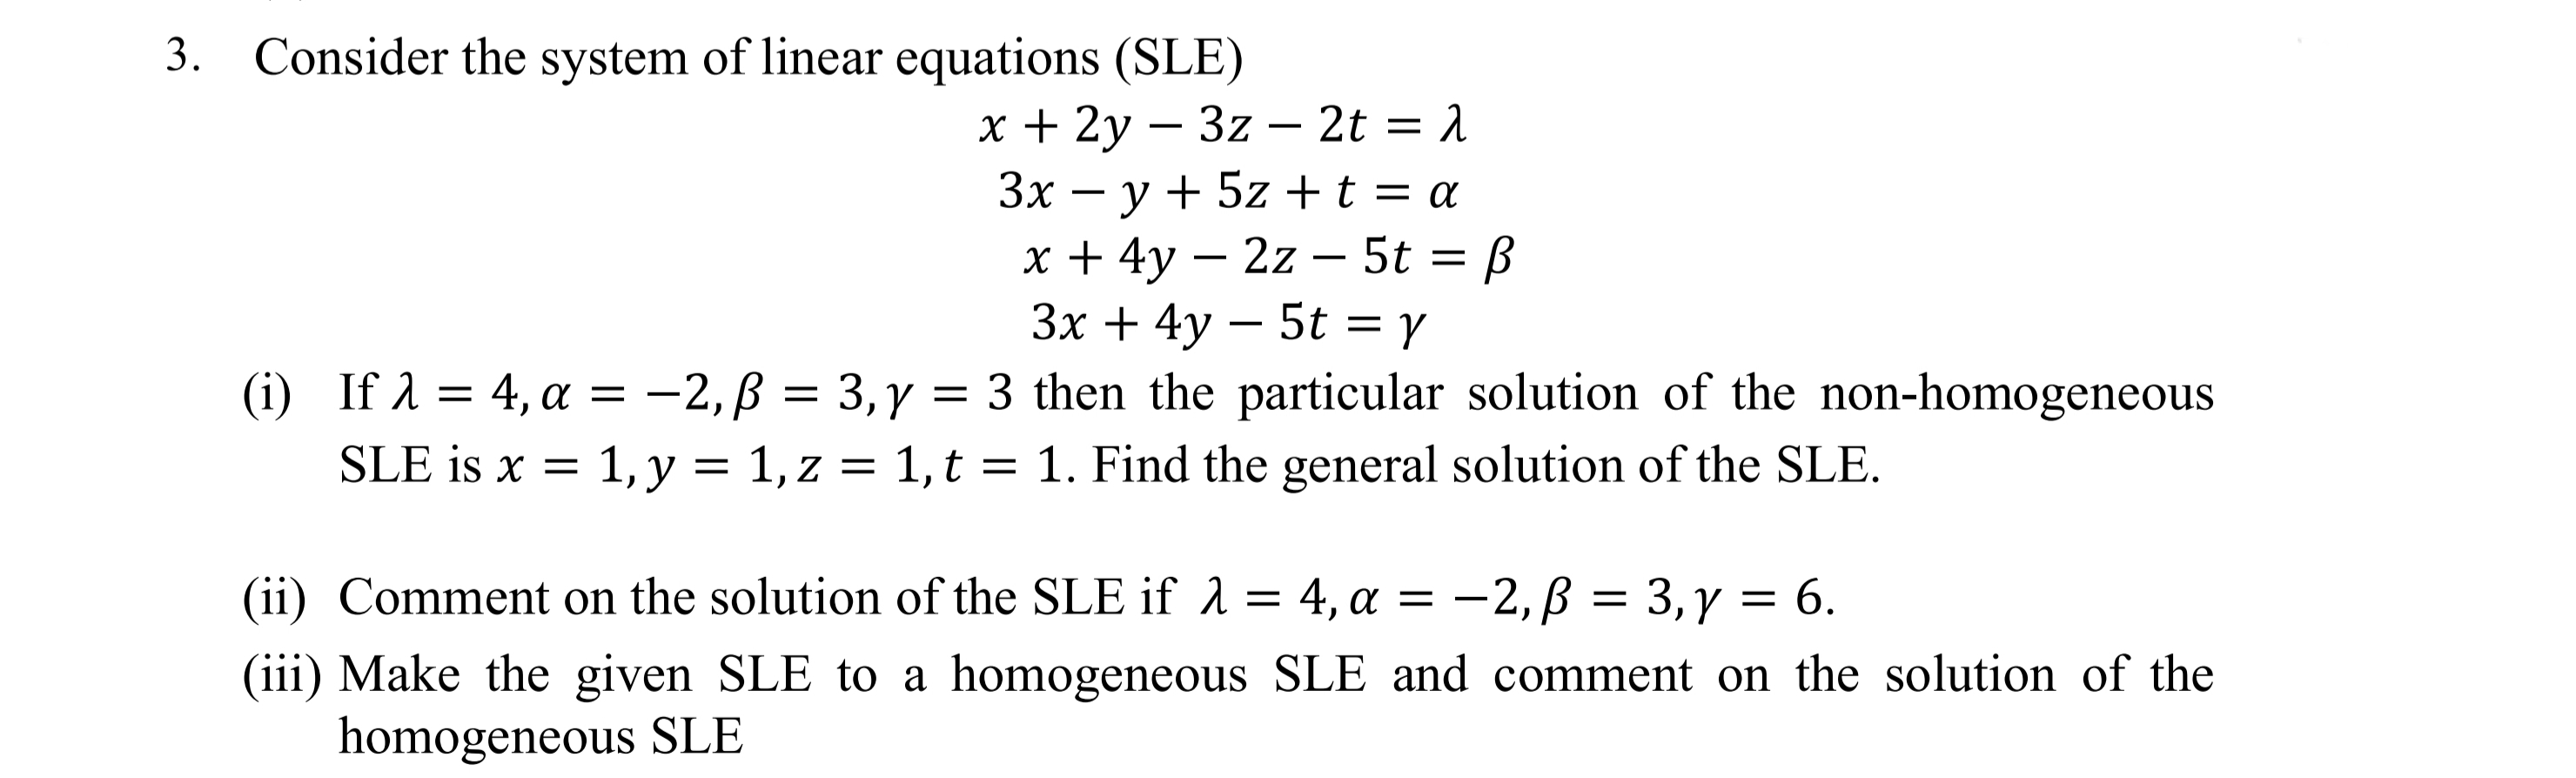 Consider the system of linear equations (SLE)
— 2t %3D 1
х+ 2у — 3z
3x – y + 5z +t = a
-
x + 4y – 2z – 5t = ß
Зx + 4у — 5t %3D ү
(i) If 1 = 4, a = -2,ß = 3,y = 3 then the particular solution of the non-homogeneous
SLE is x = 1, y = 1, z = 1,t = 1. Find the general solution of the SLE.
-
||
|
3.
